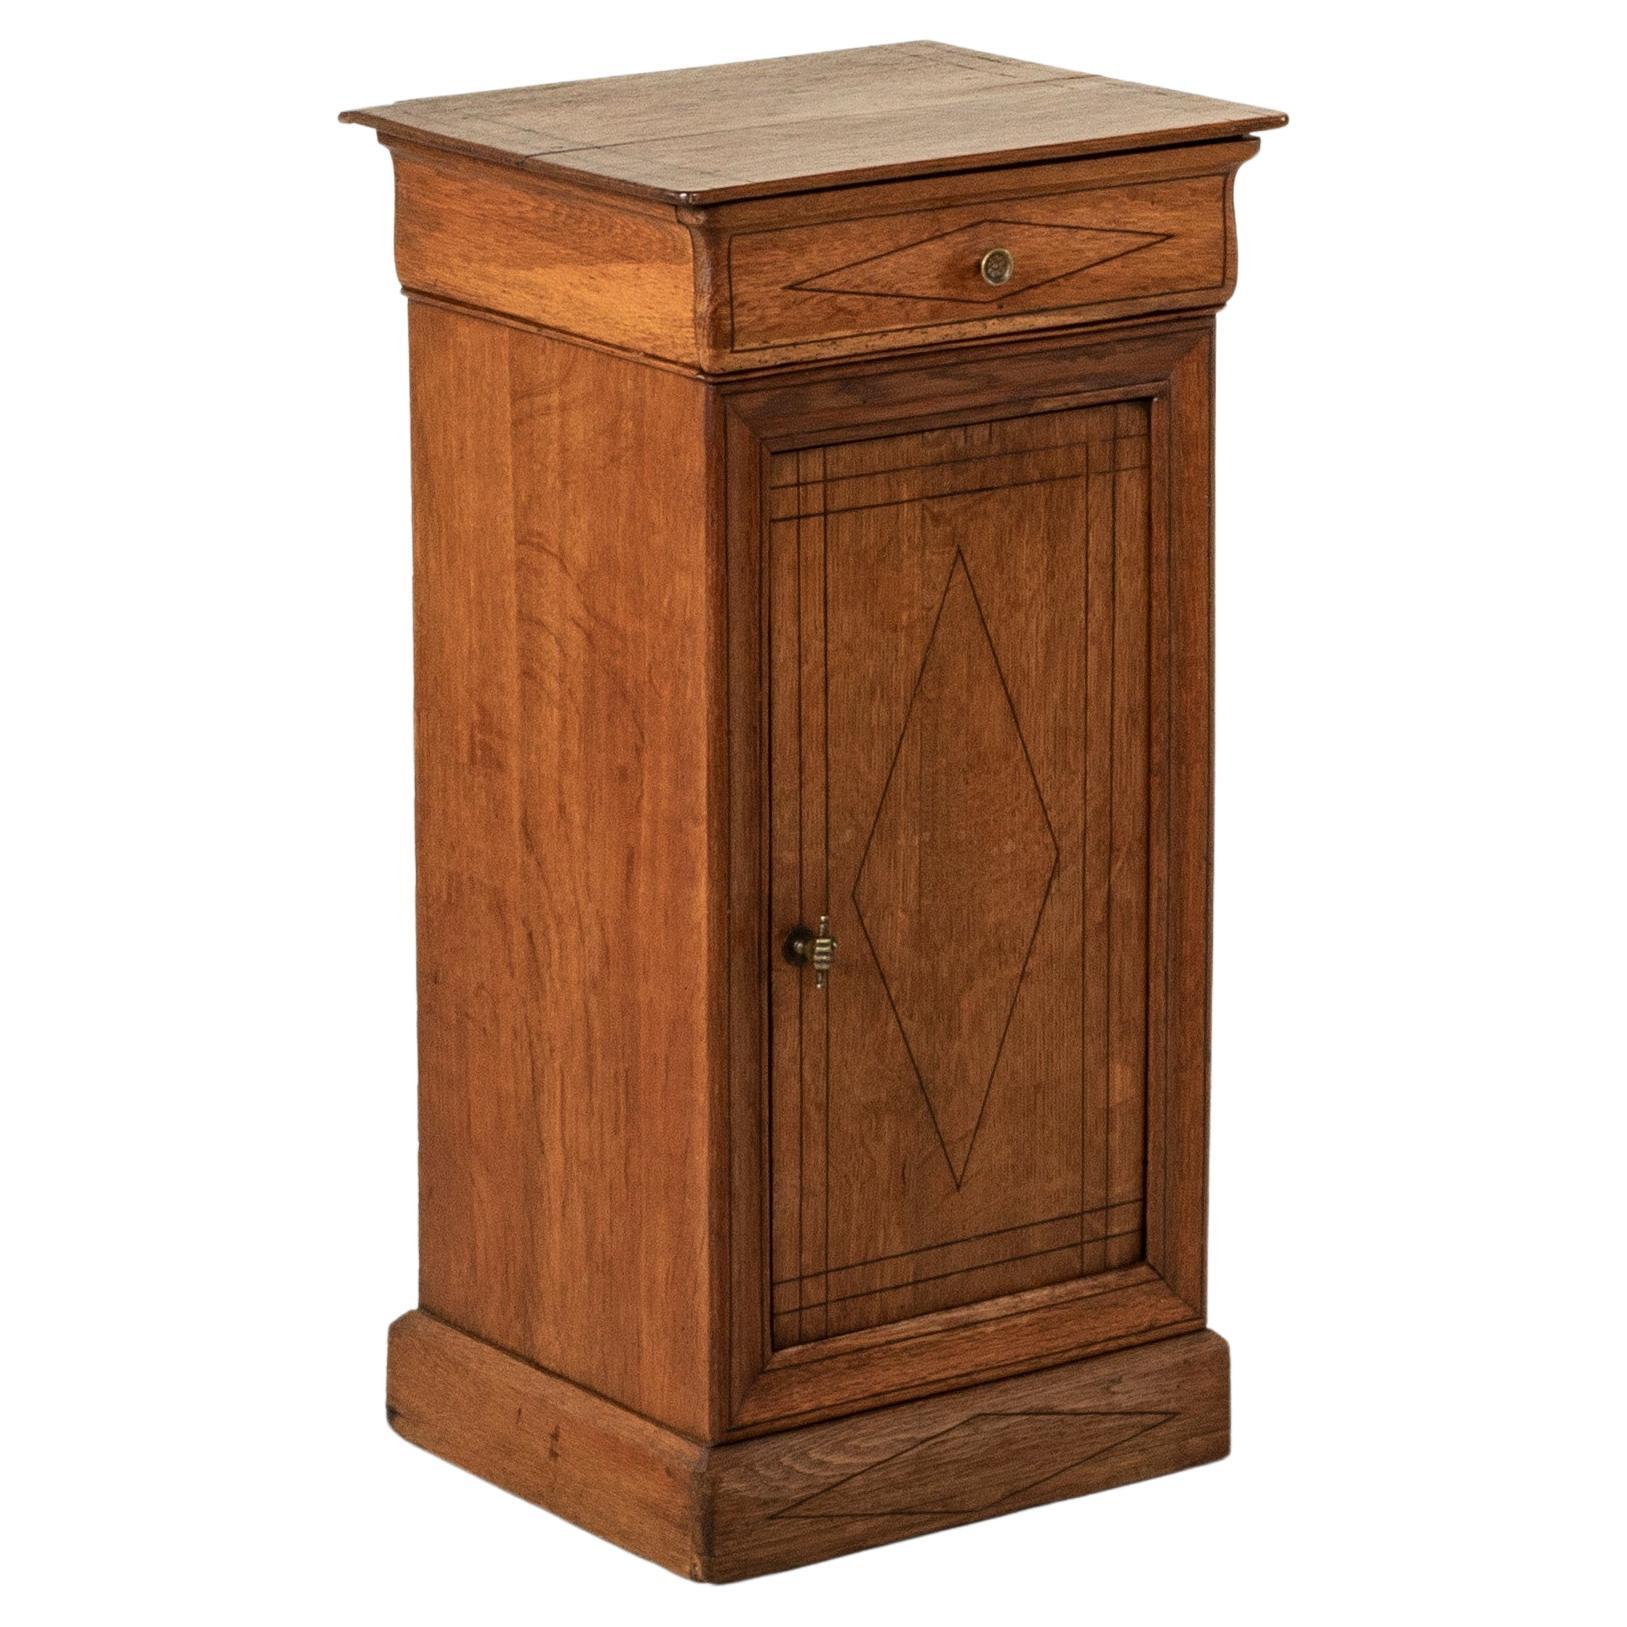 Late 19th Century French Directoire Style Oak Nightstand or Side Table